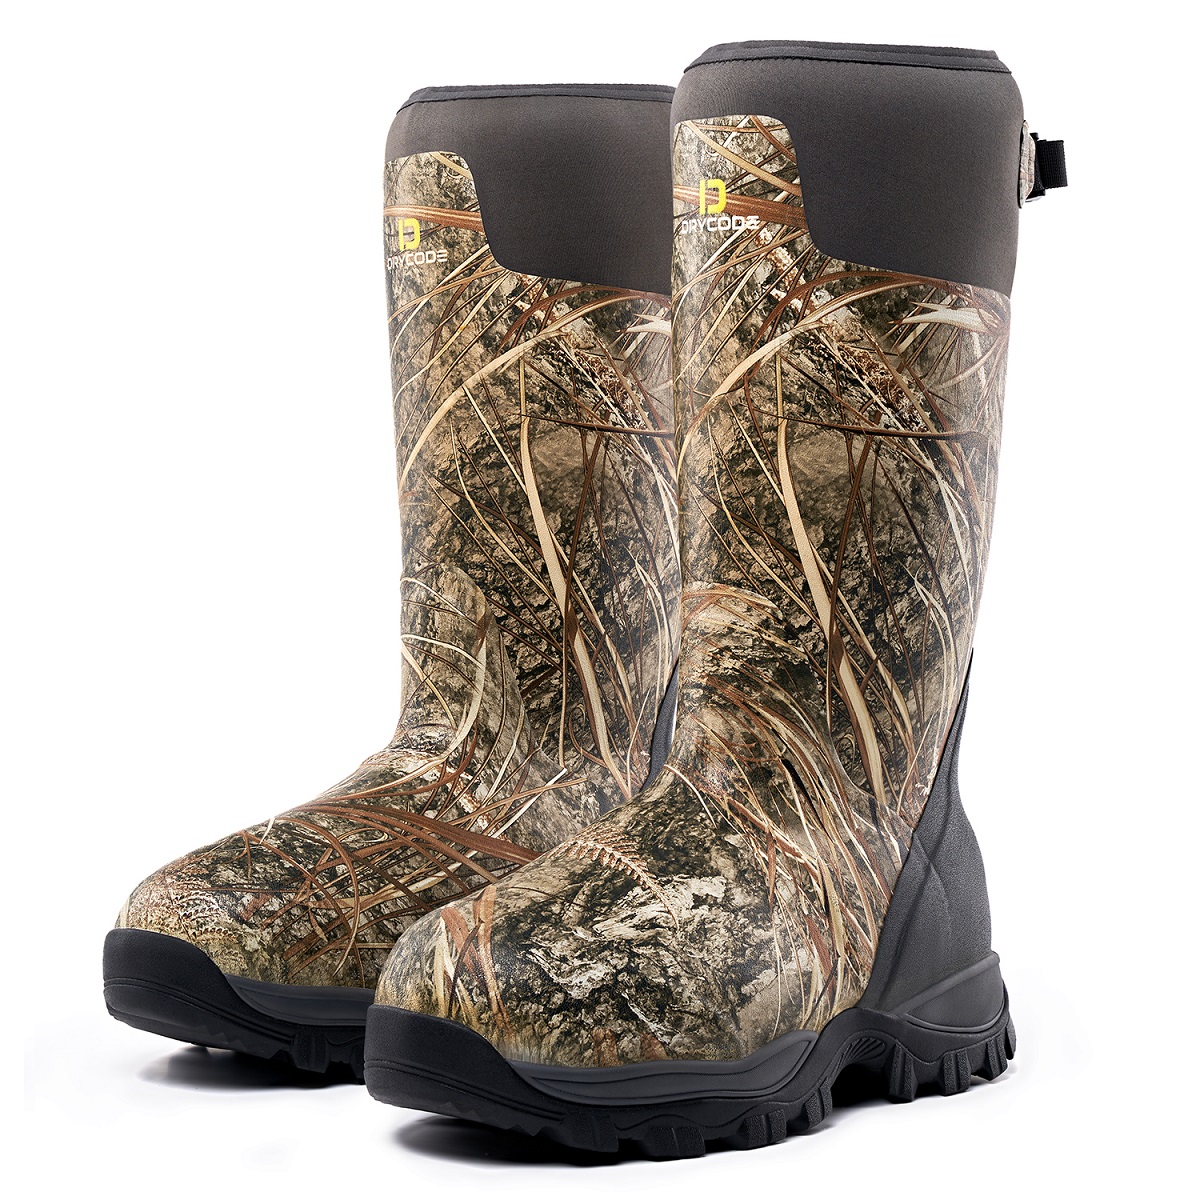 DRYCODE Camo Hunting Boots for Men&Women, Warm Hunting Hiking Boots